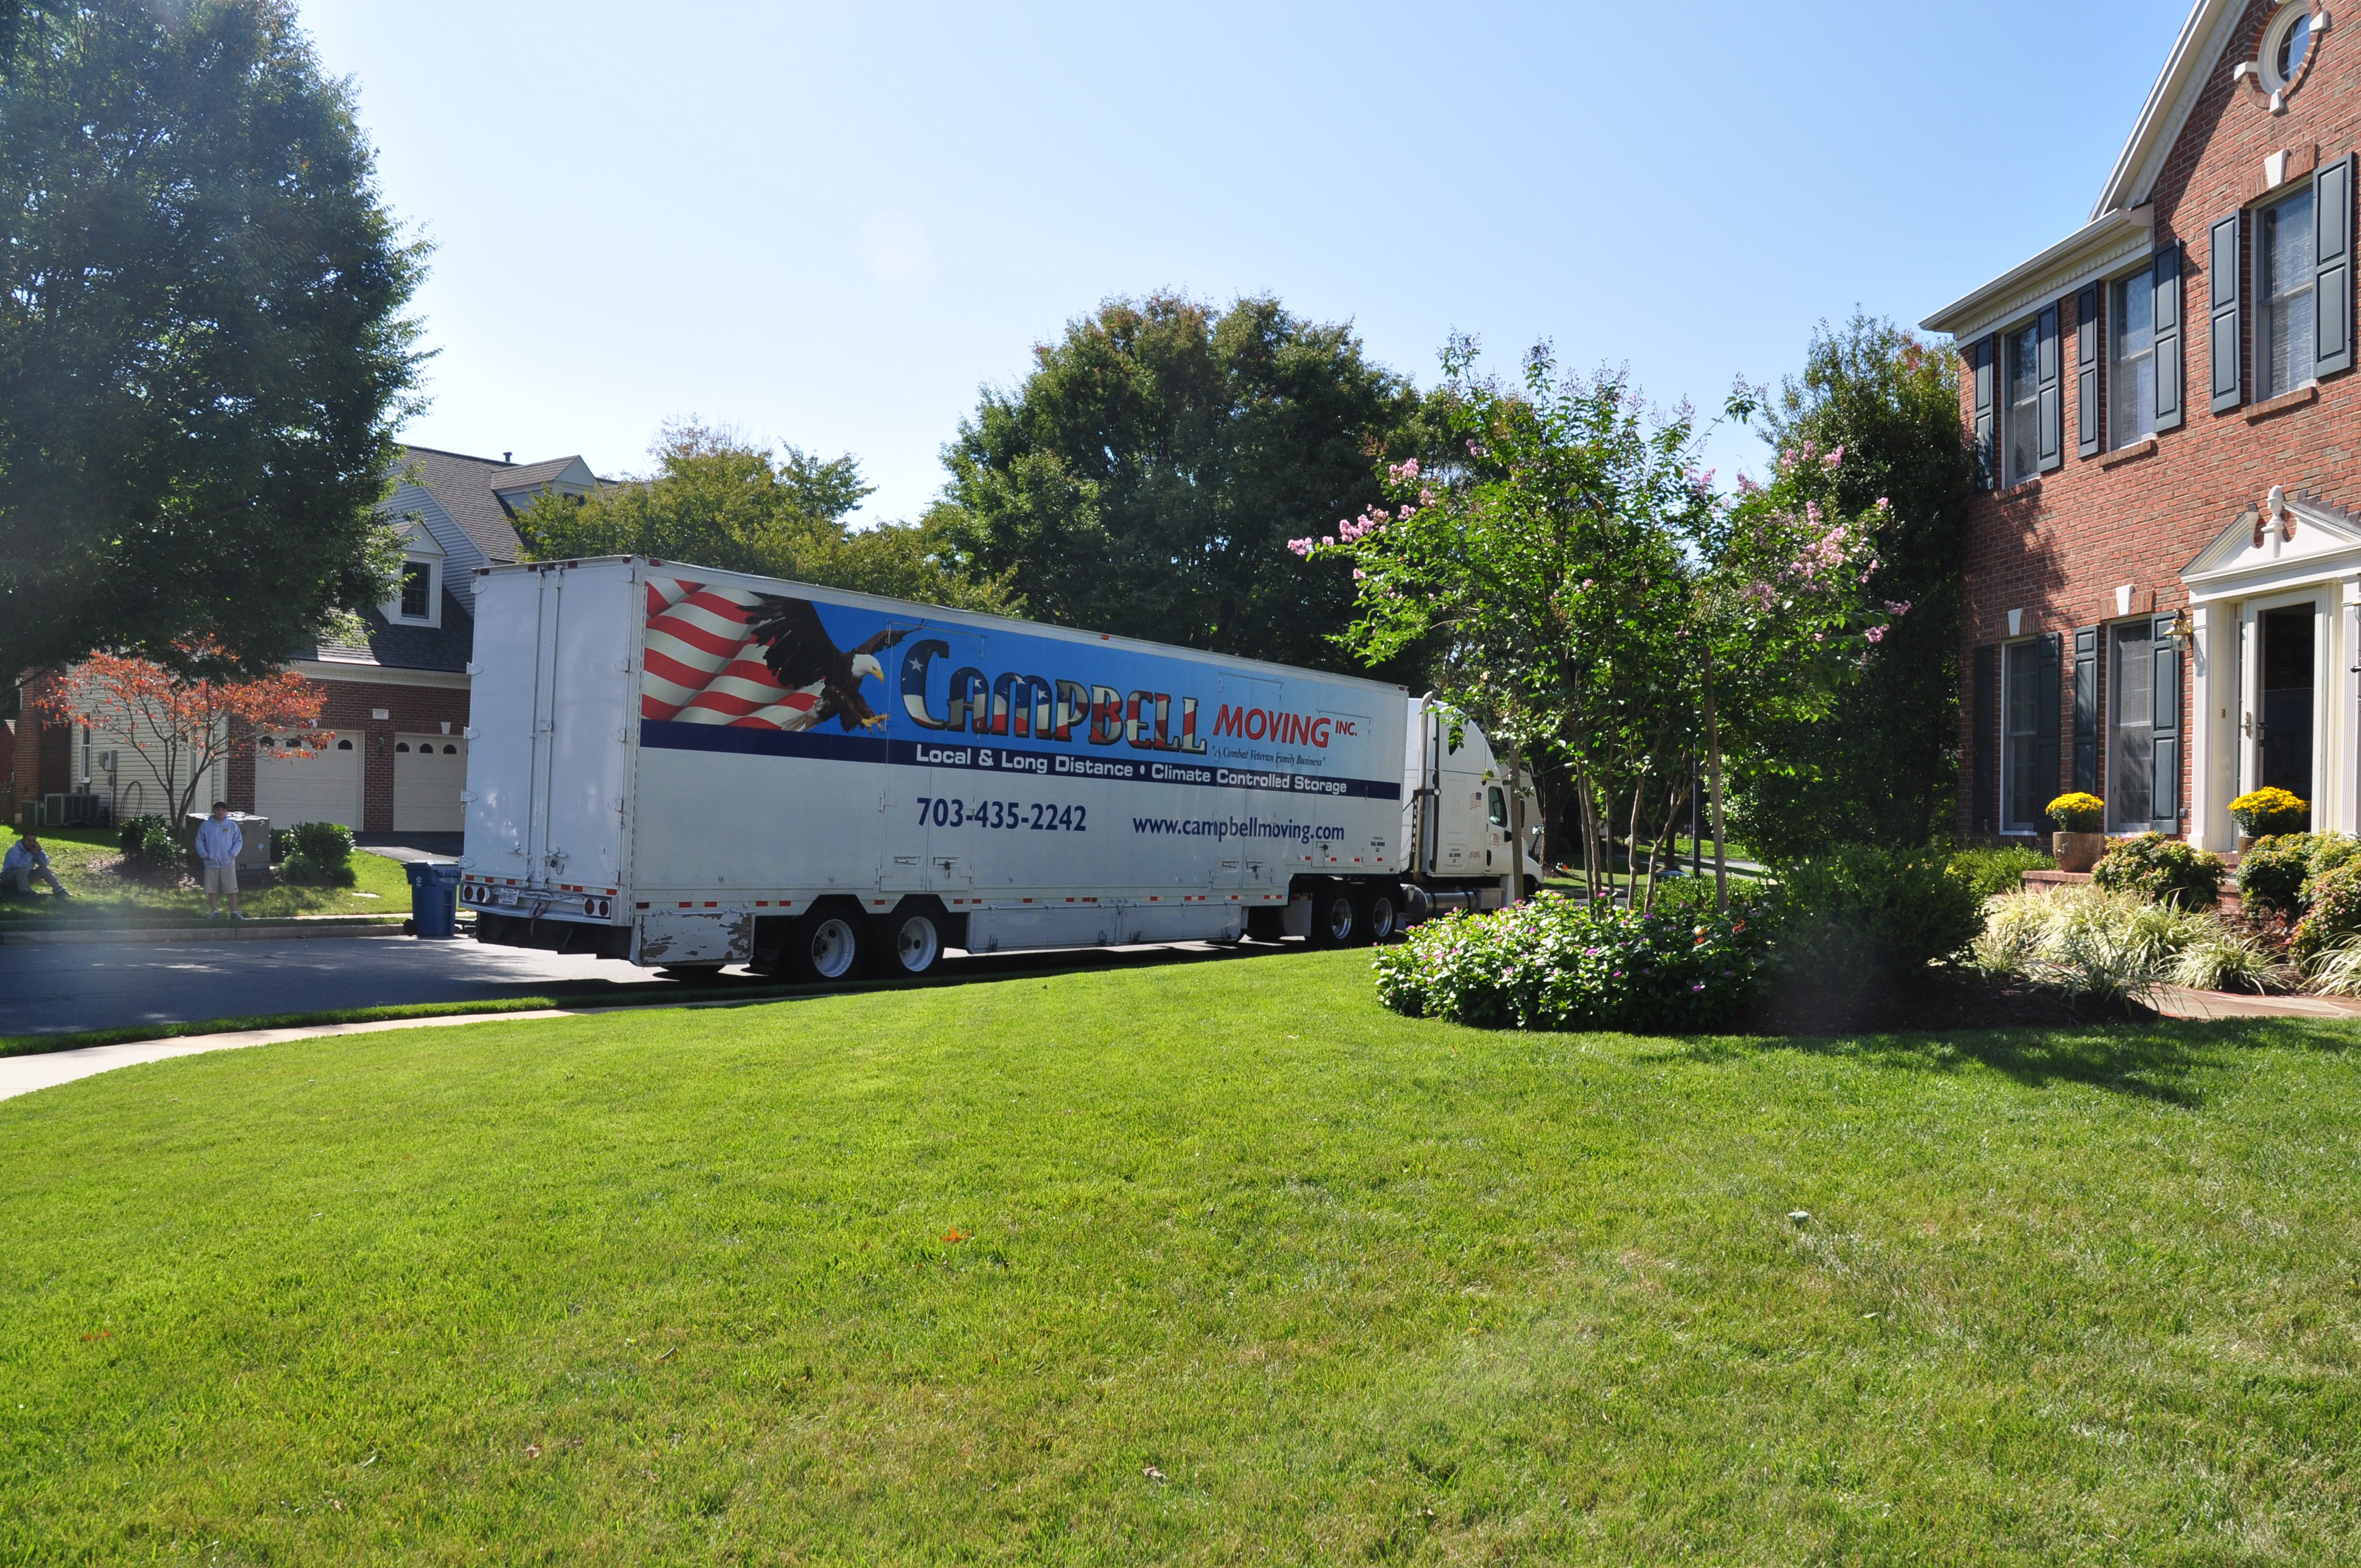 Campbell Moving, Inc. Photo